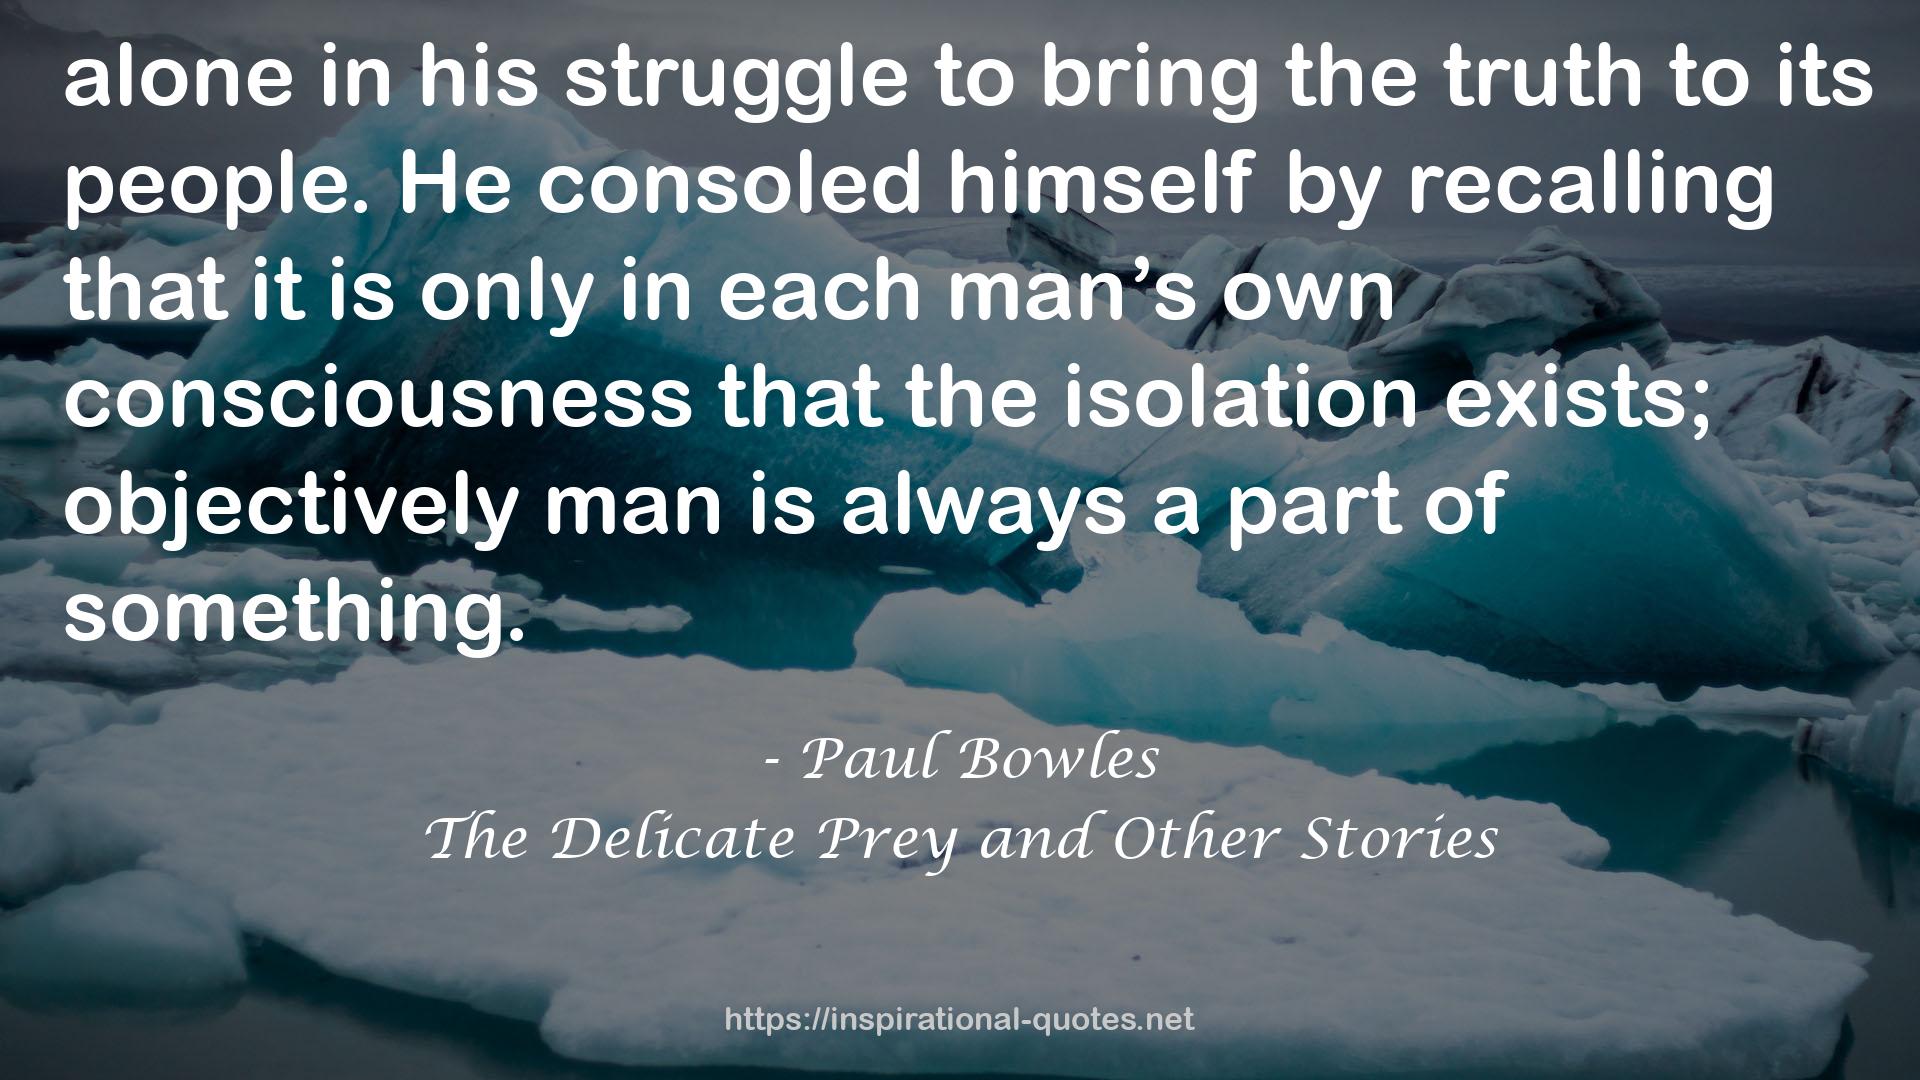 The Delicate Prey and Other Stories QUOTES